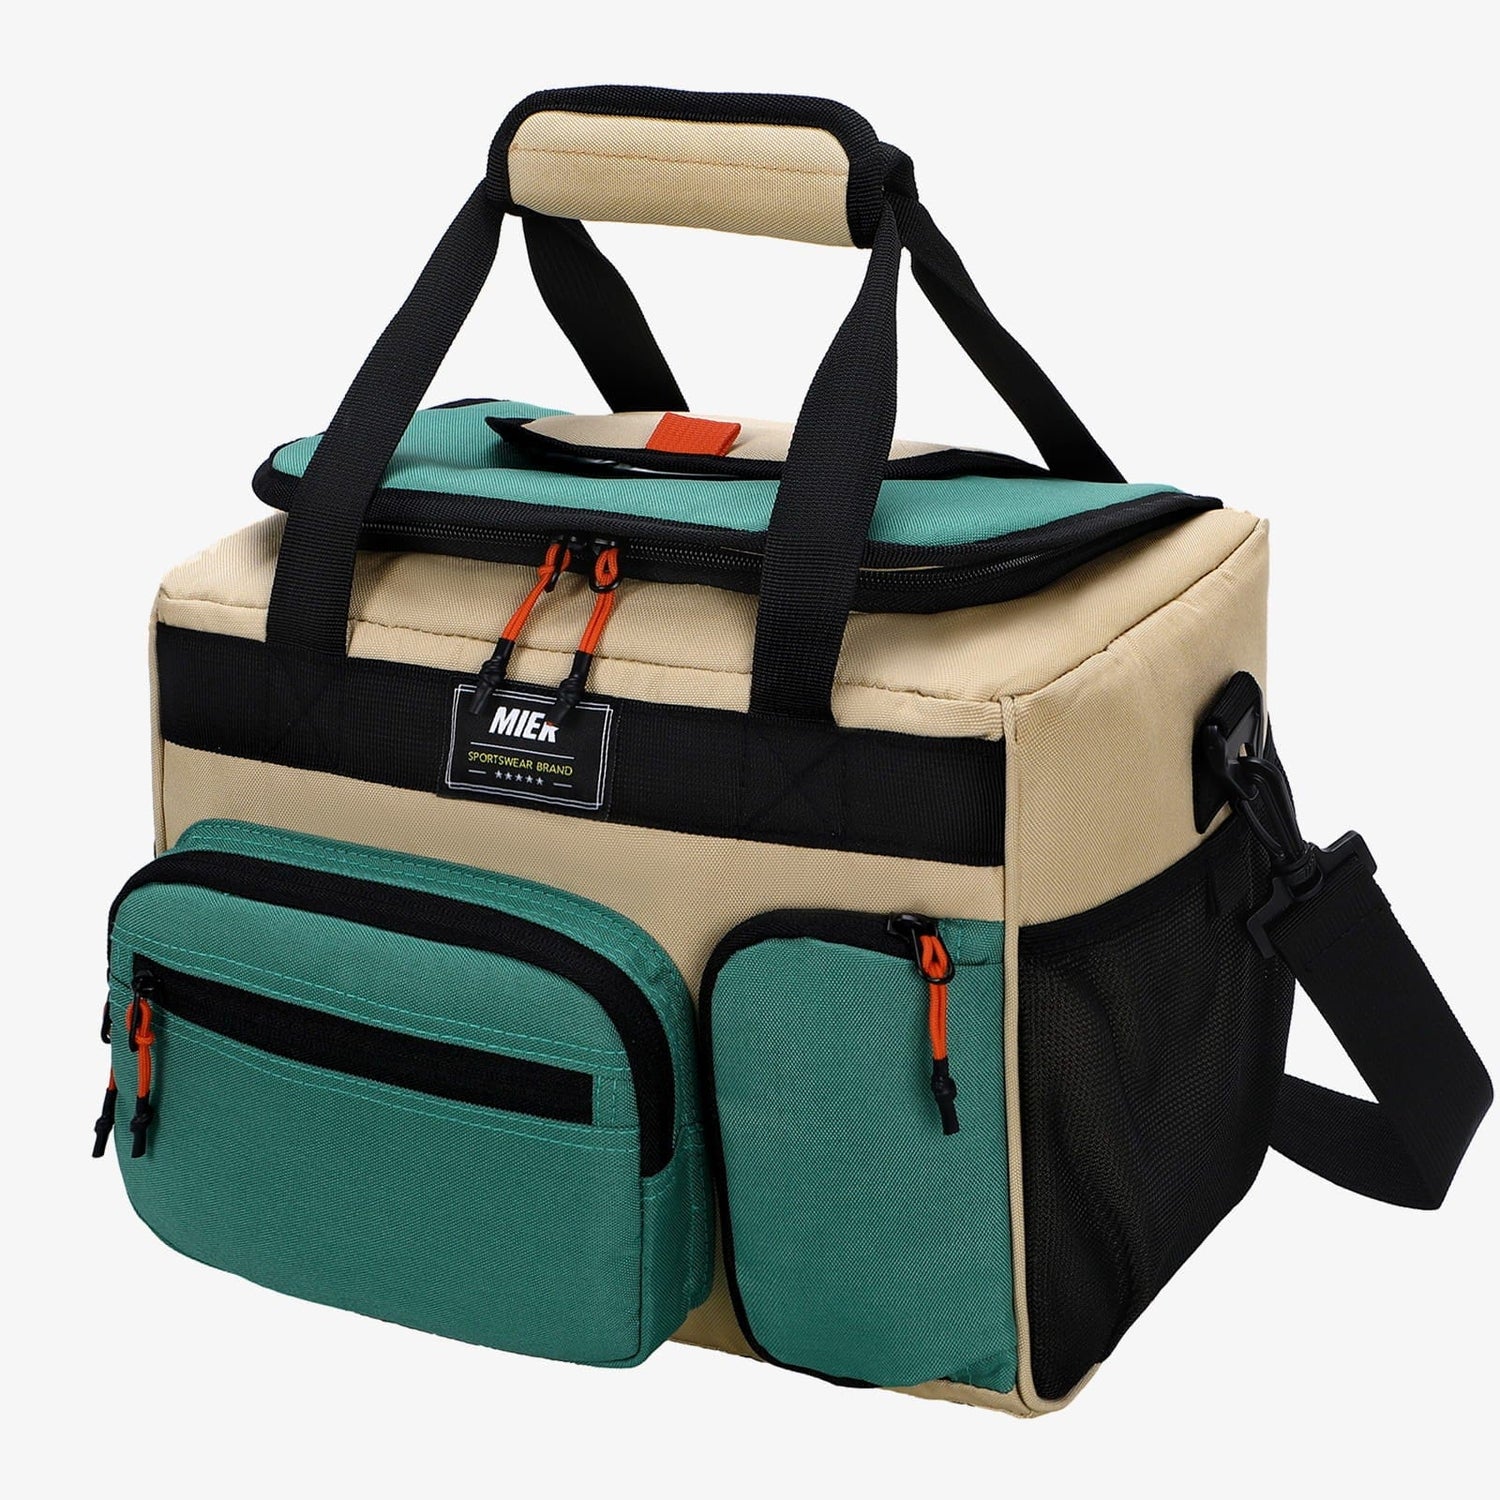 Insulated Soft Cooler Lunch Bag for Men Women, 30Can Adult Lunch Bag Khaki Green MIER